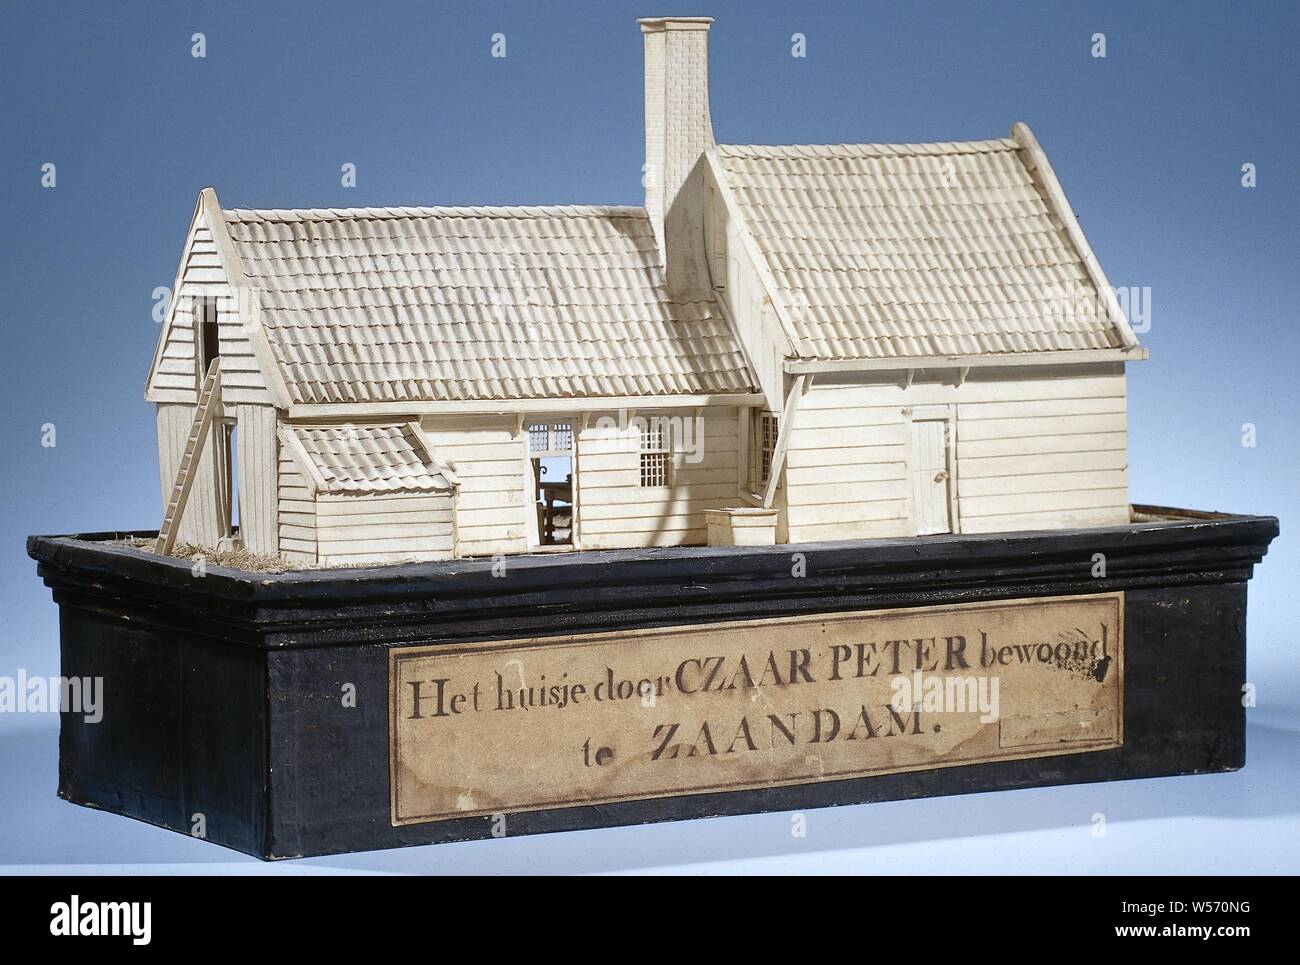 Paper model of the house of Tsar Peter I in Zaandam, The house of Czar Peter in Zaandam. Model in white paper, in glass case, Zaandam, Peter I the Great (Tsar of Russia), François de Richemont, The Hague, c. 1822, paper, wood (plant material), cardboard, glass, snipping, h 21 cm × w 27 cm × h 12.5 cm Stock Photo